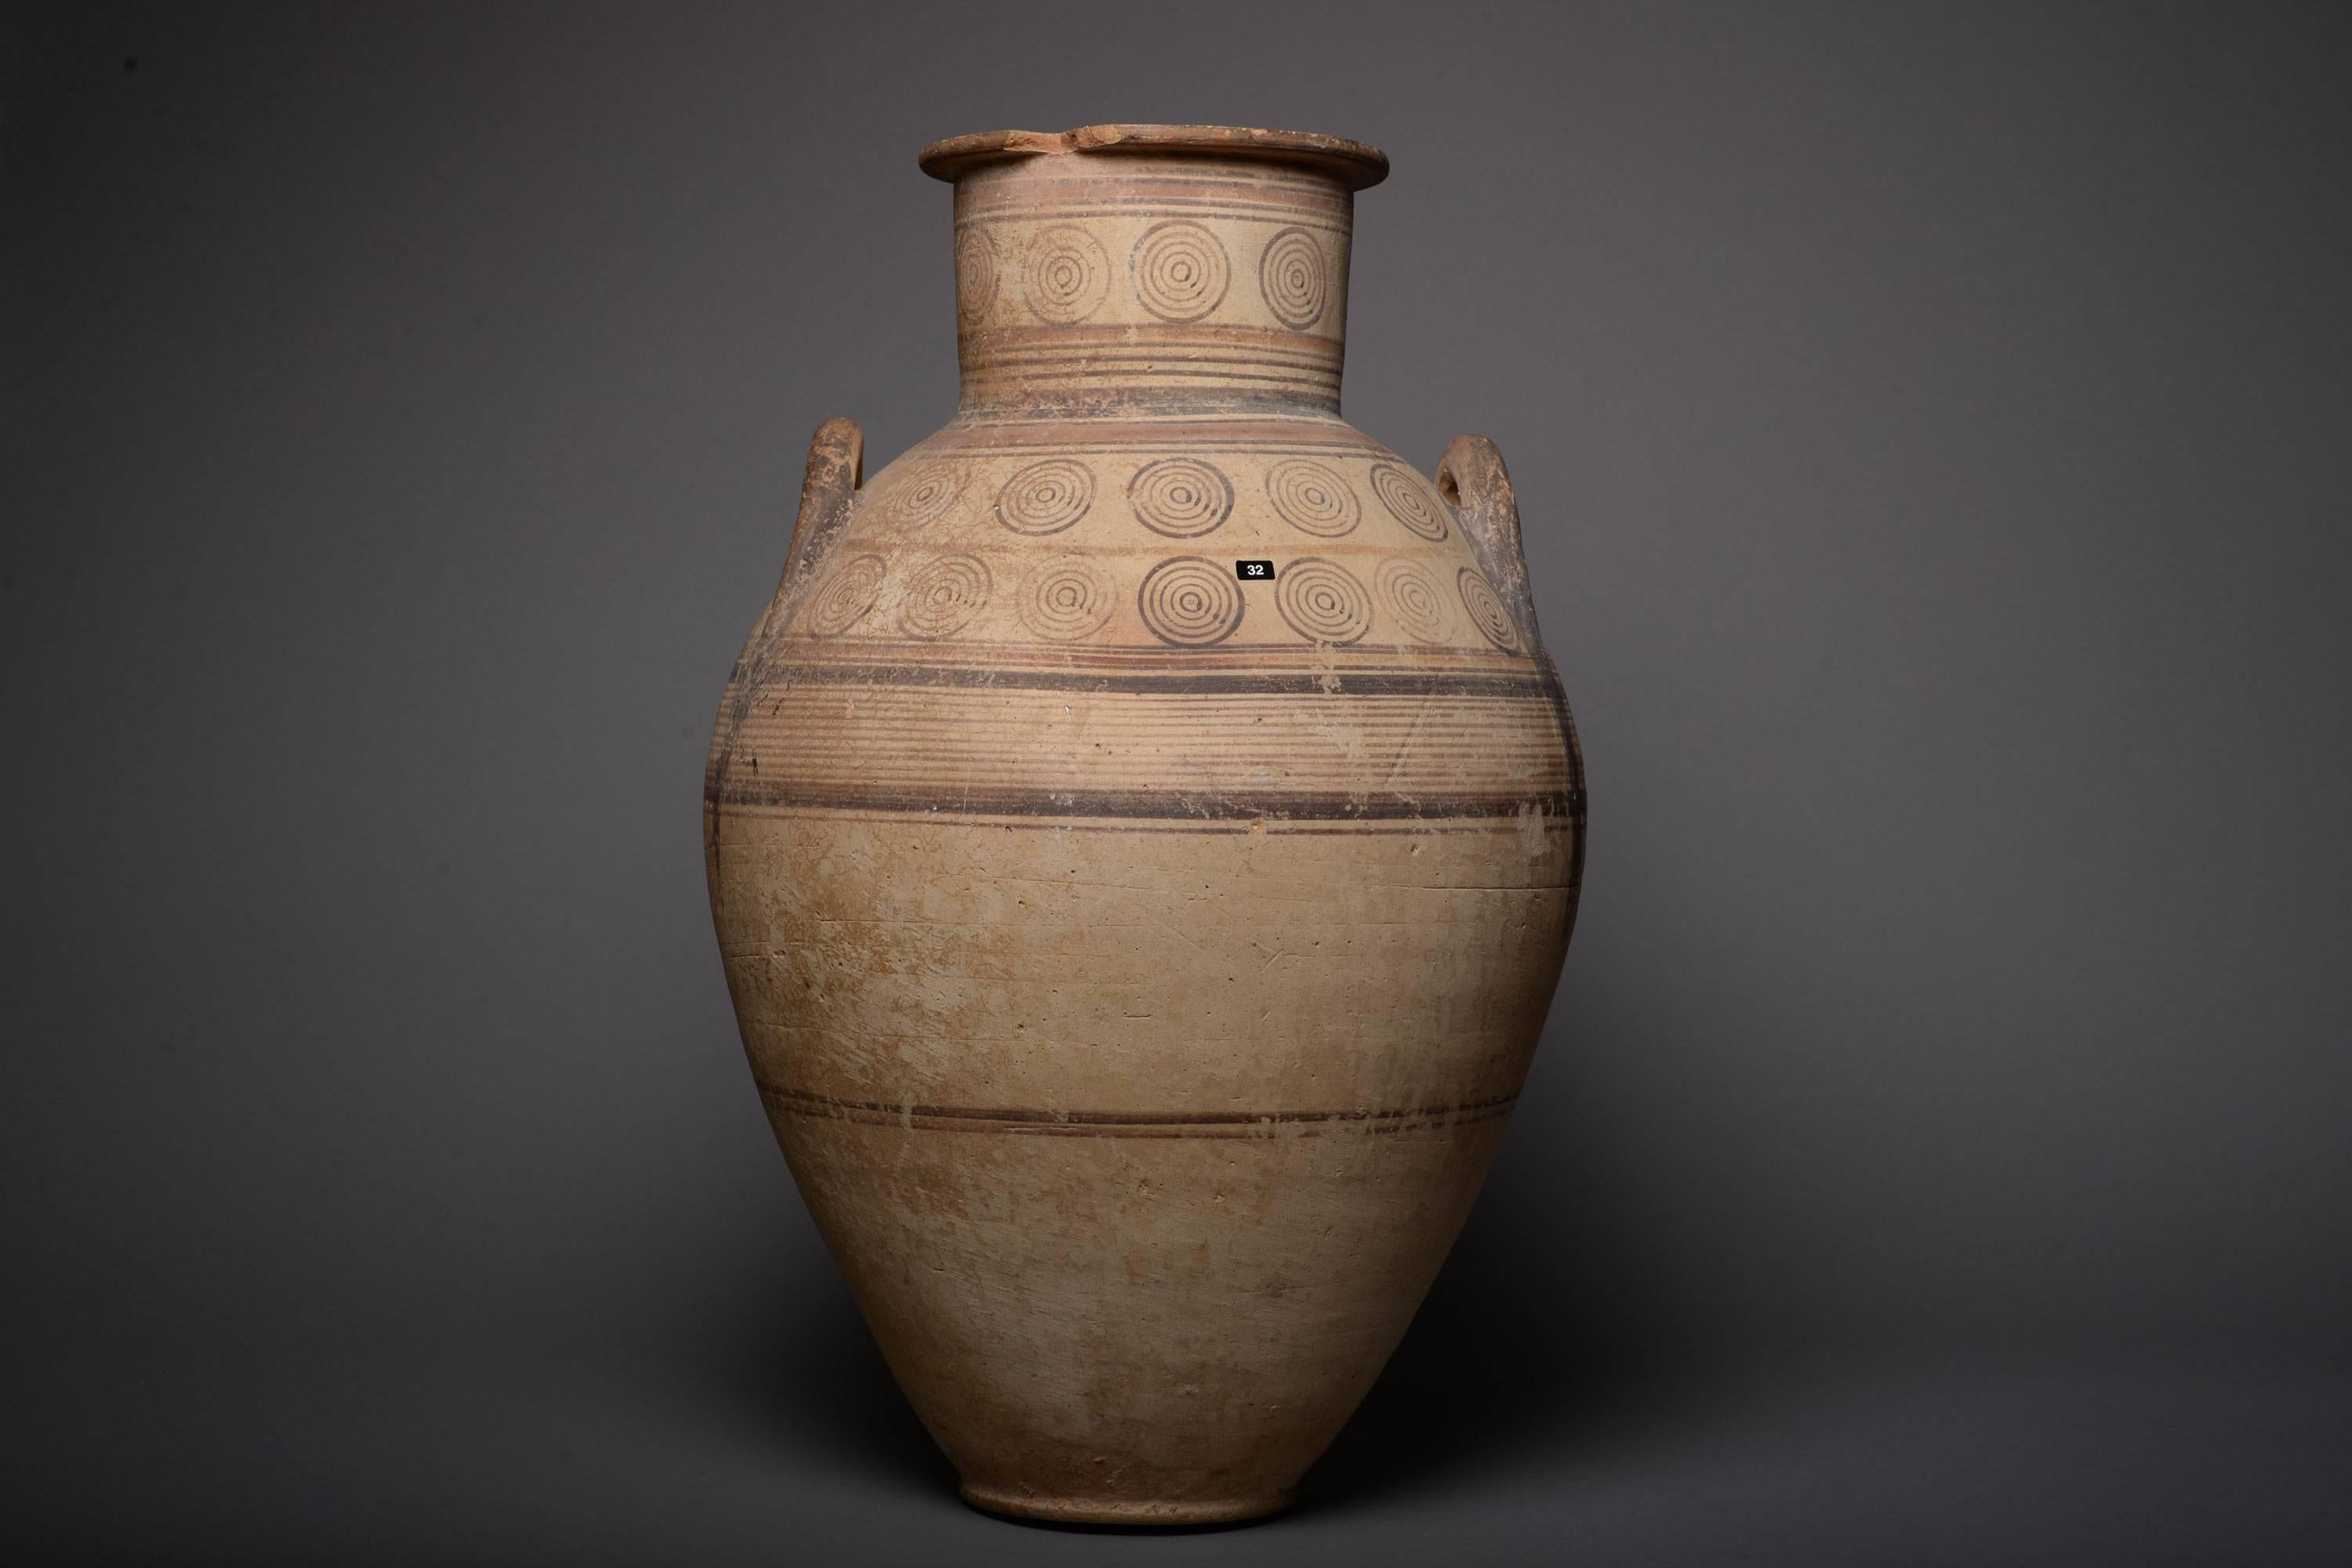 Central American Ancient Cypriot Amphora - 950 BC